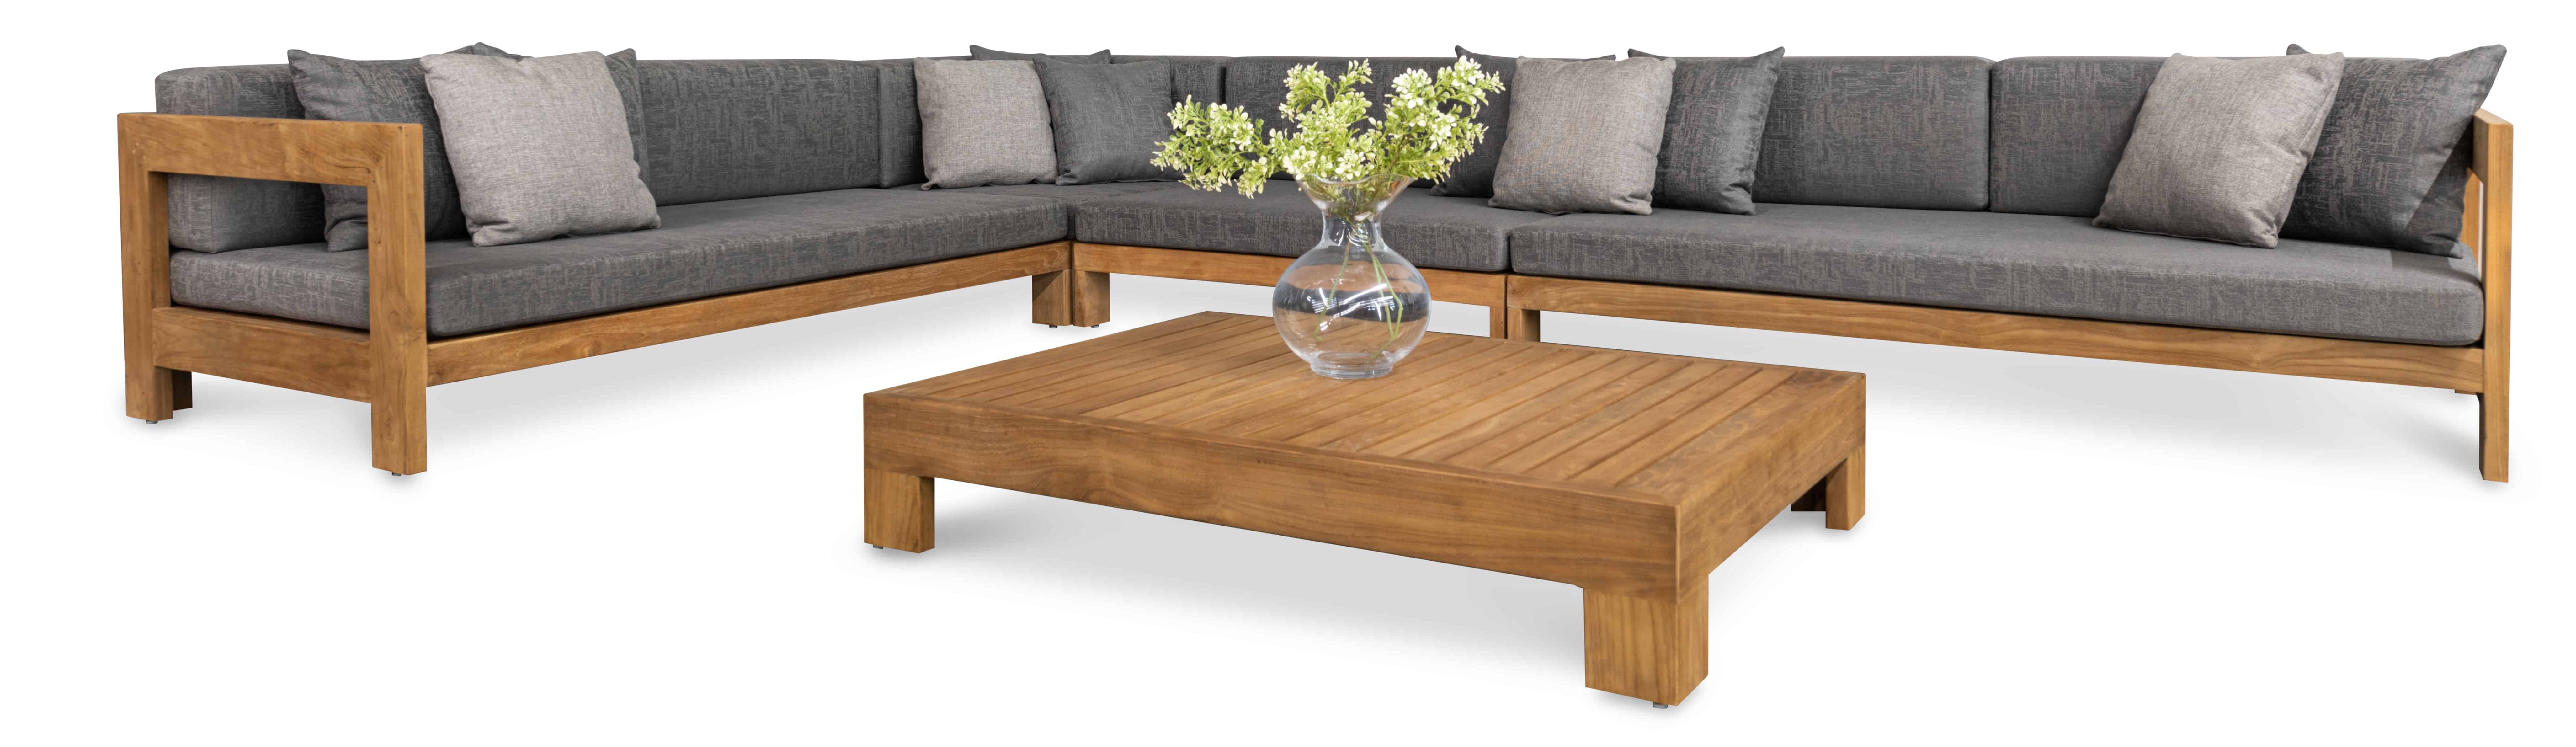 Coast Teak Outdoor Sectional Collection